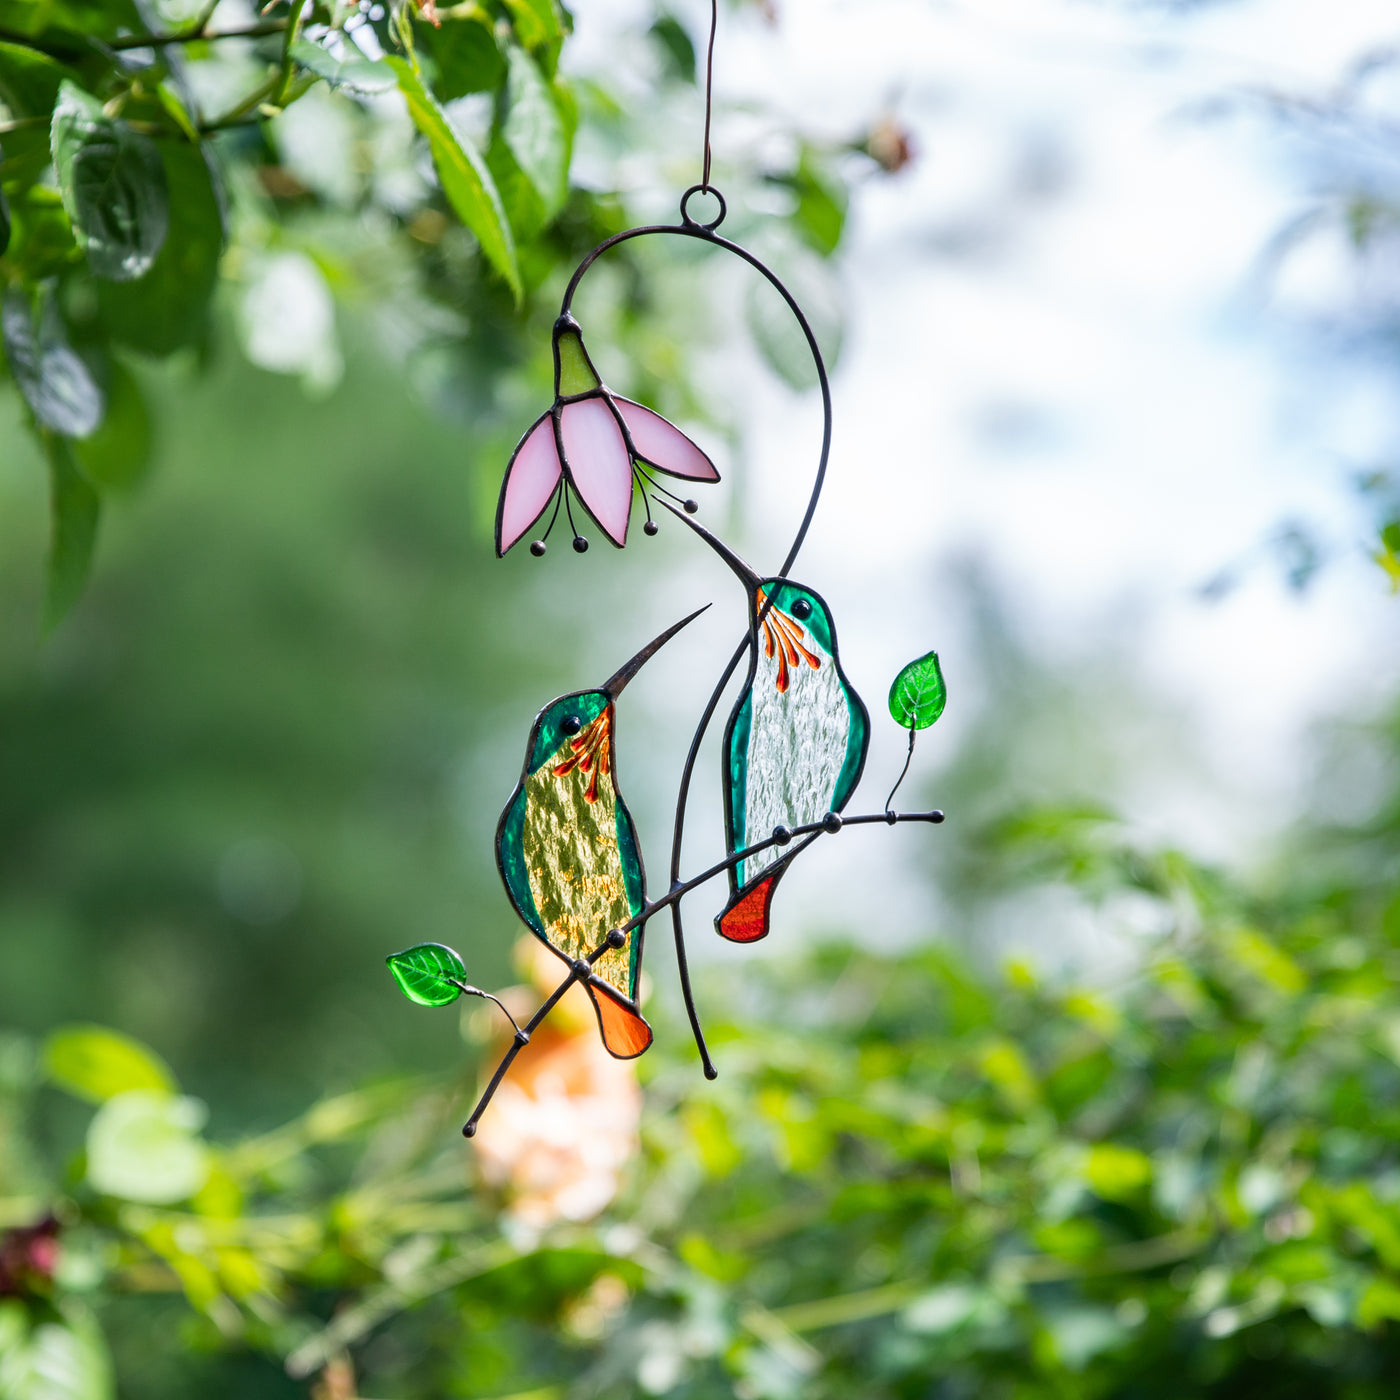 Stained glass suncatcher of a pair of hummingbirds with the pink flower